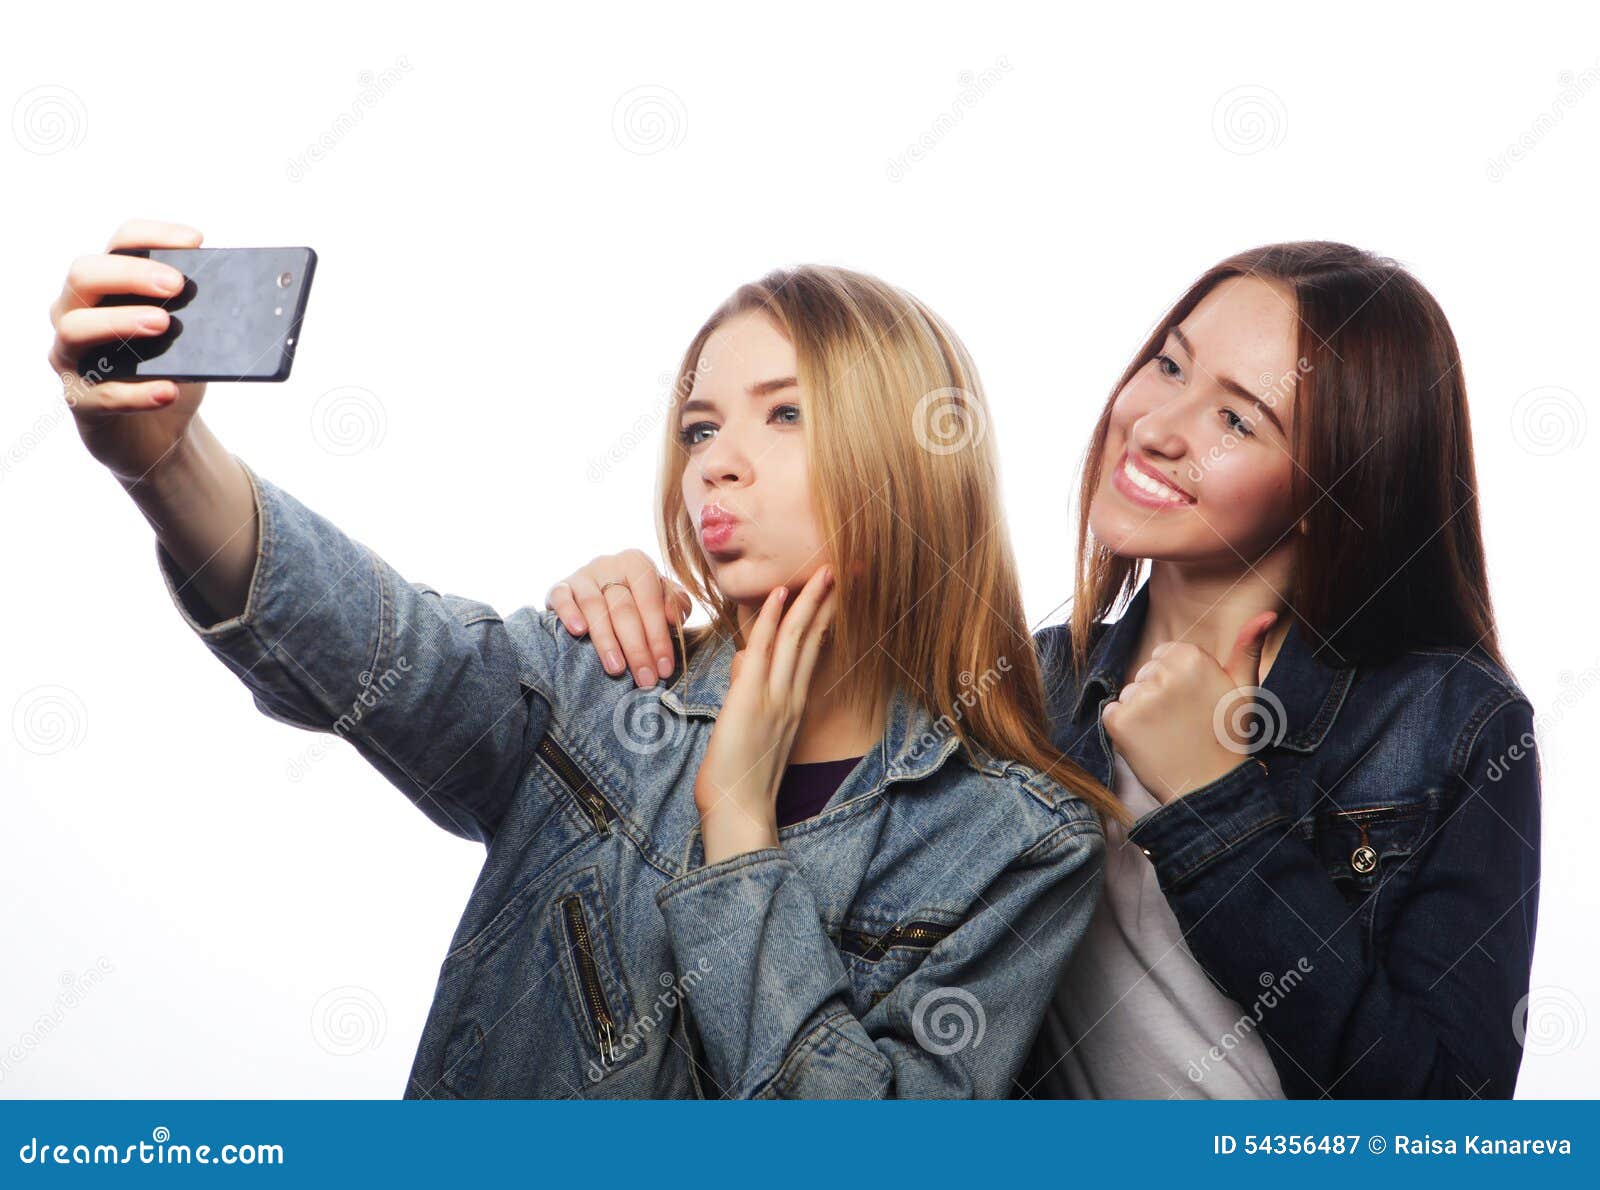 Teenagers Taking Picture with Smartphone Stock Image - Image of blond ...